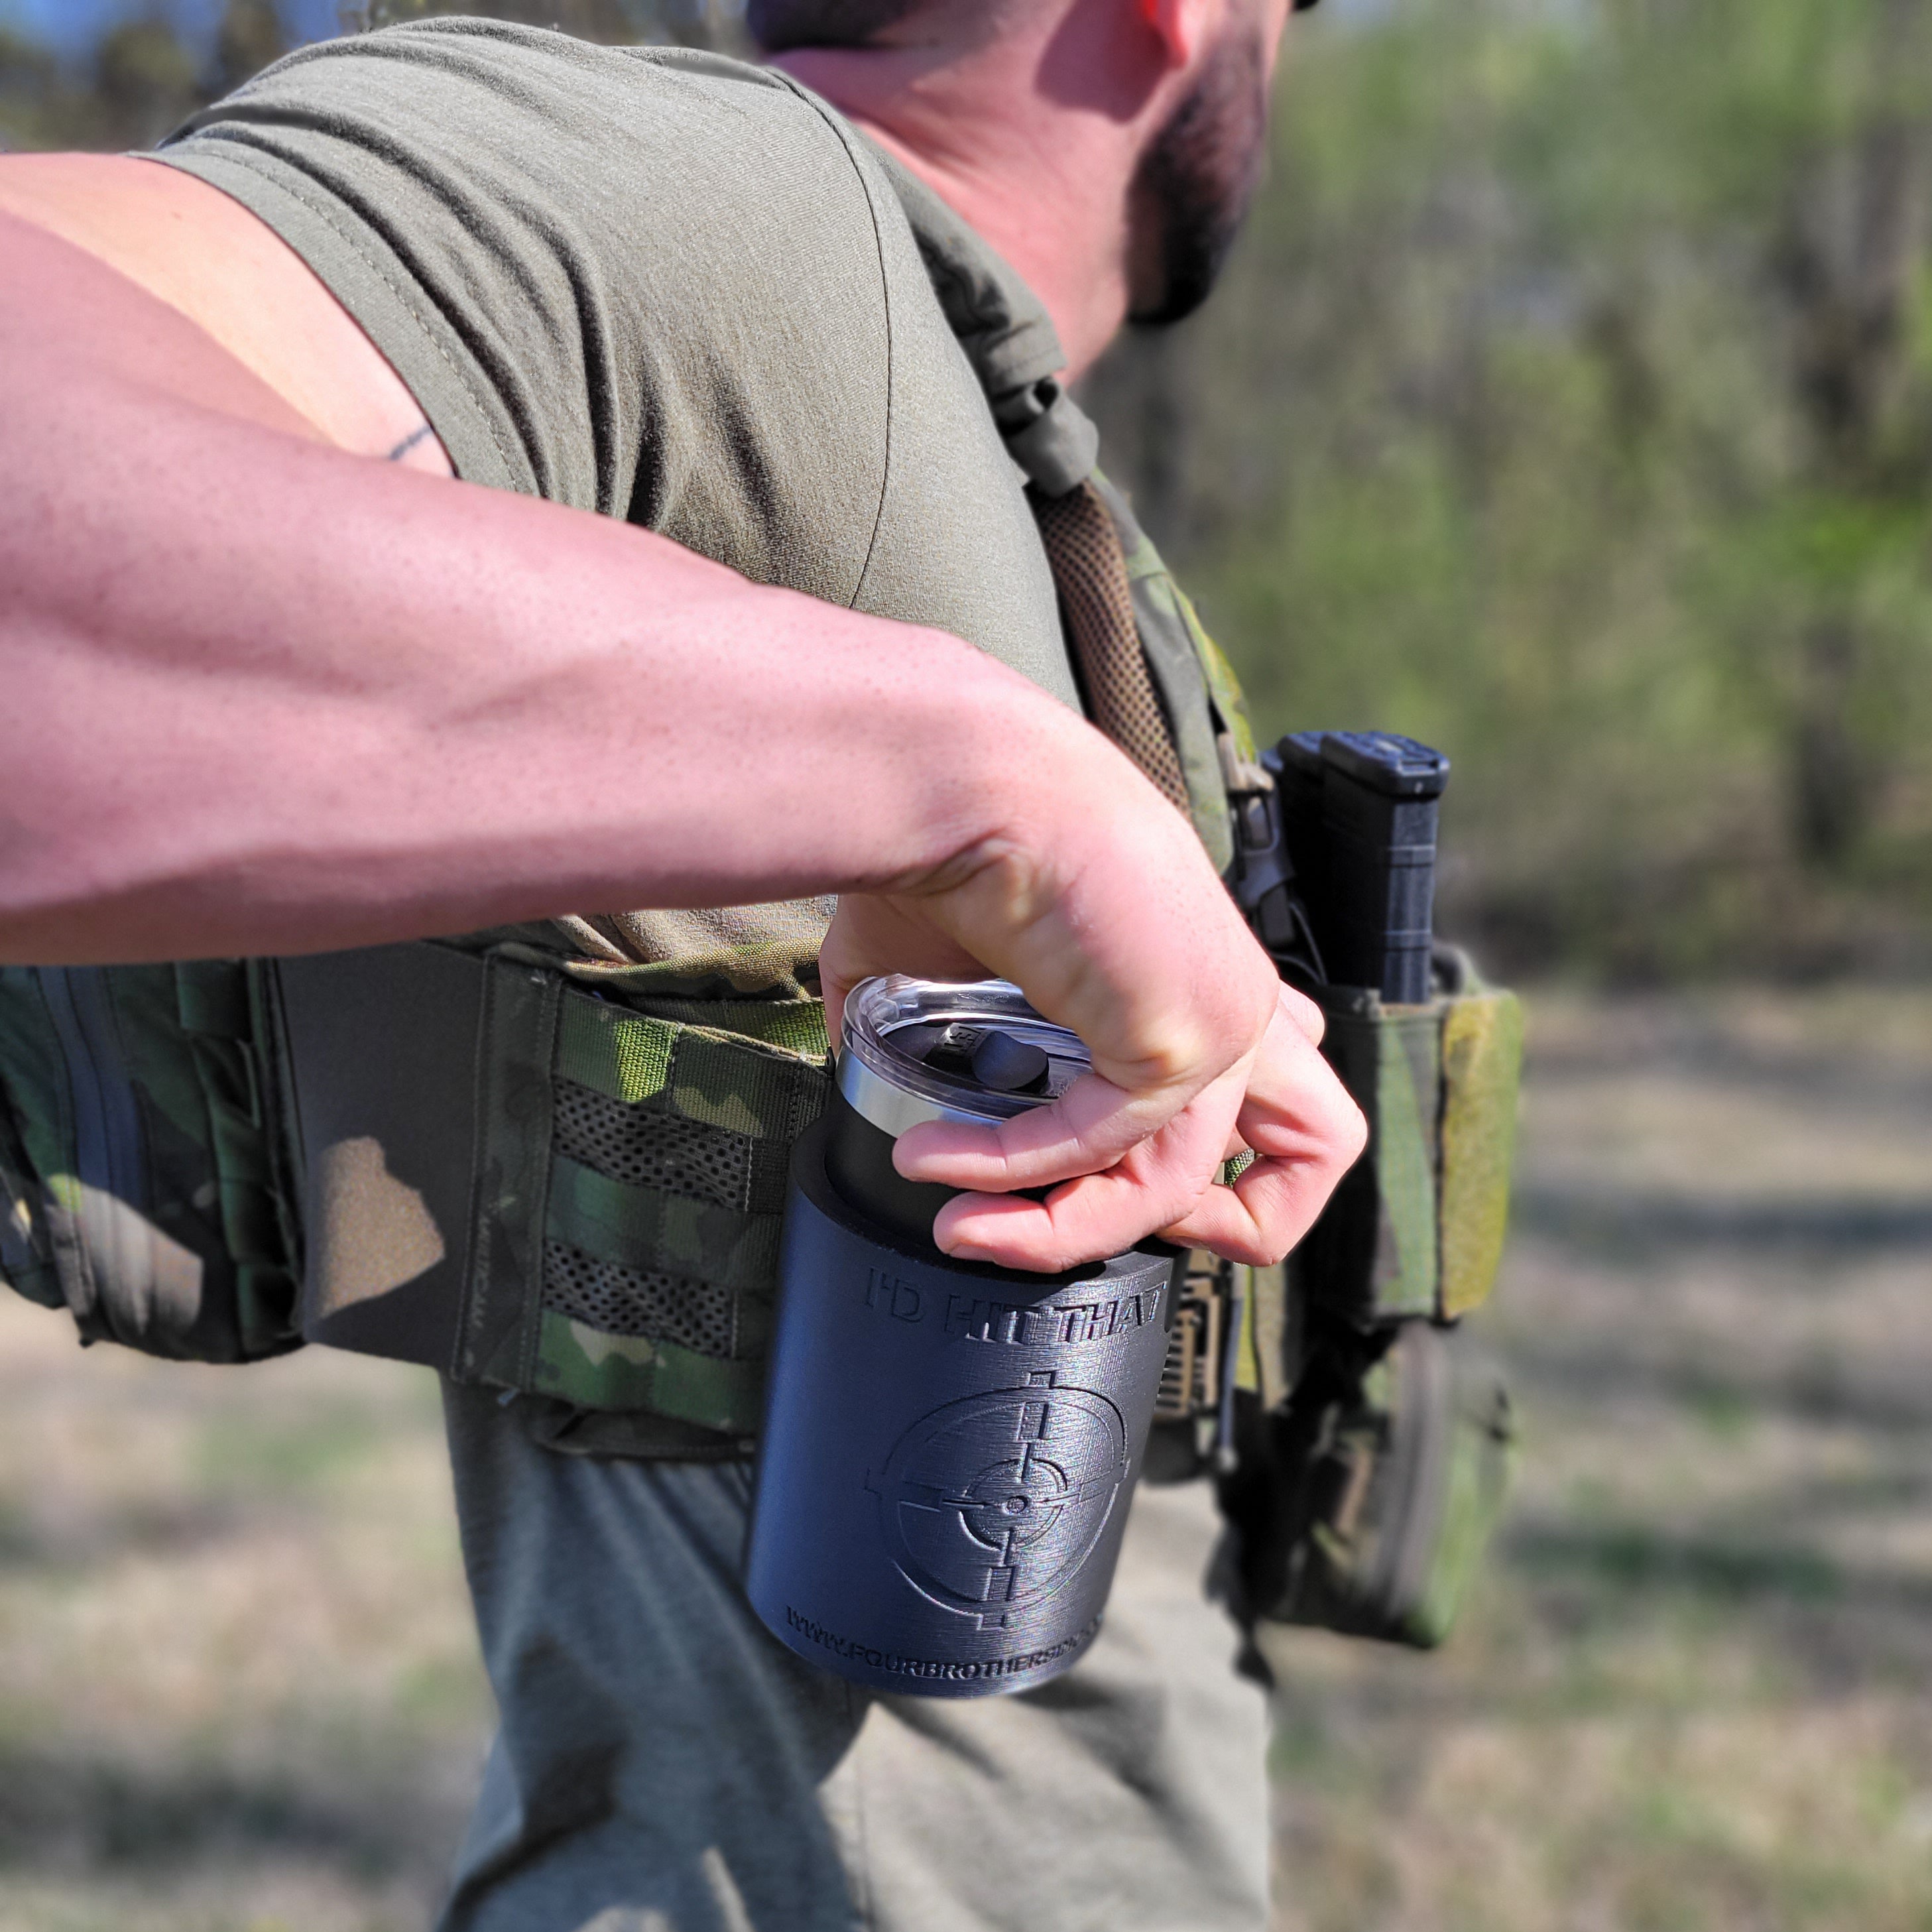 Our 3D-printed 20-ounce Yeti Cup Holder is printed in-house with PETG material. With both Molle and Belt mount options available, this is the best way to take your coffee to the shooting range and keep that caffeine on you. This product is the brainchild of Dave Kipper, the ILEA lead firearms Instructor. Made in USA